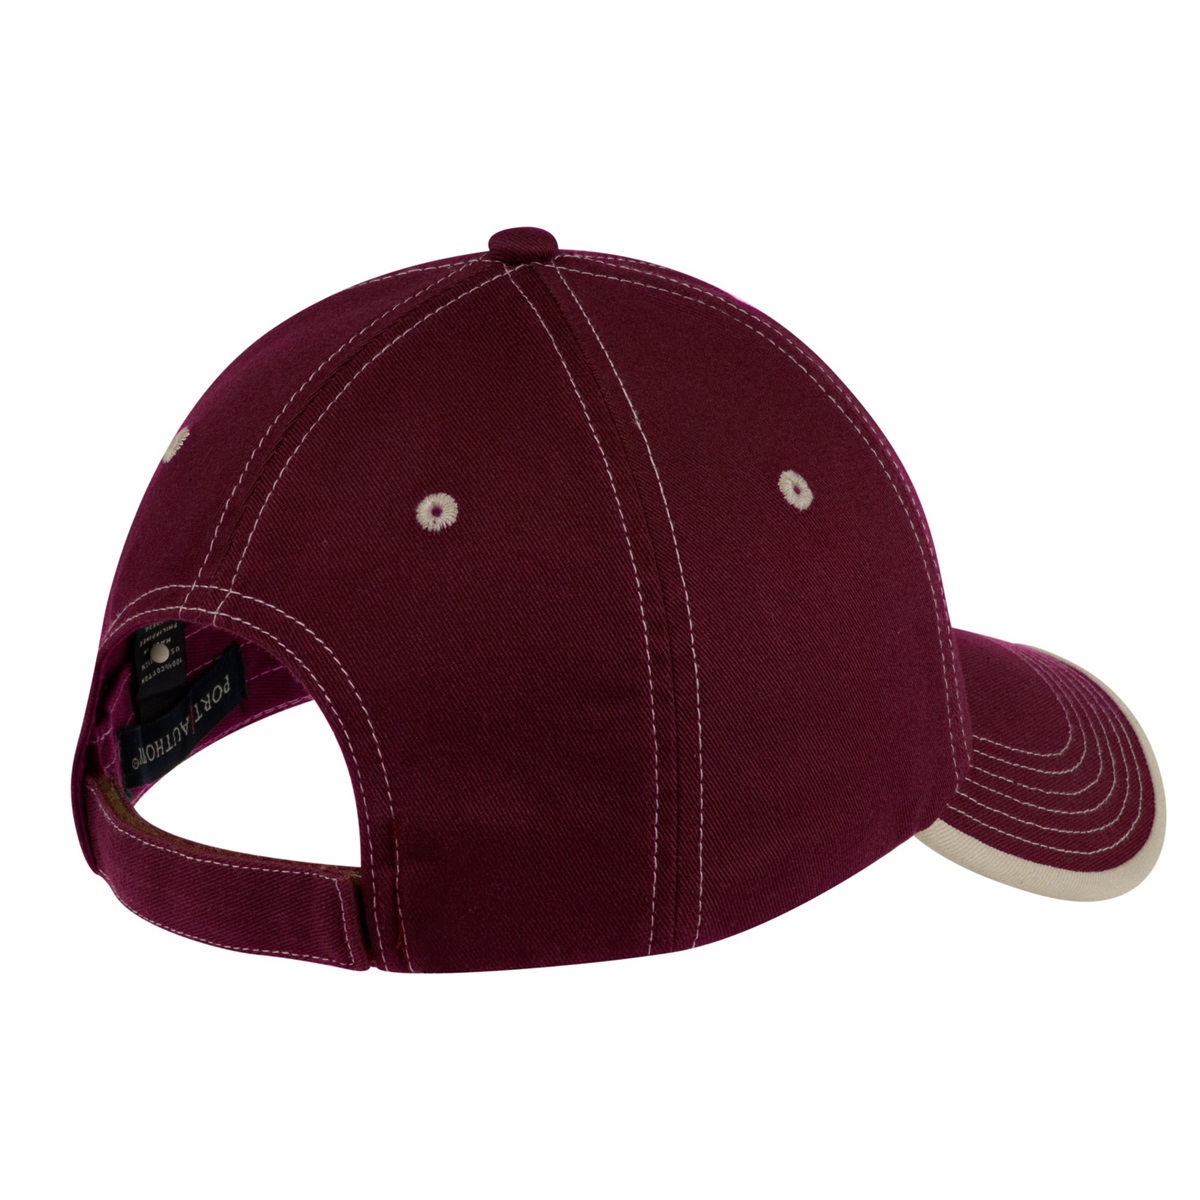 Port Authority C835 Vintage Washed Contrast Stitch Cap - Maroon/Stone ...